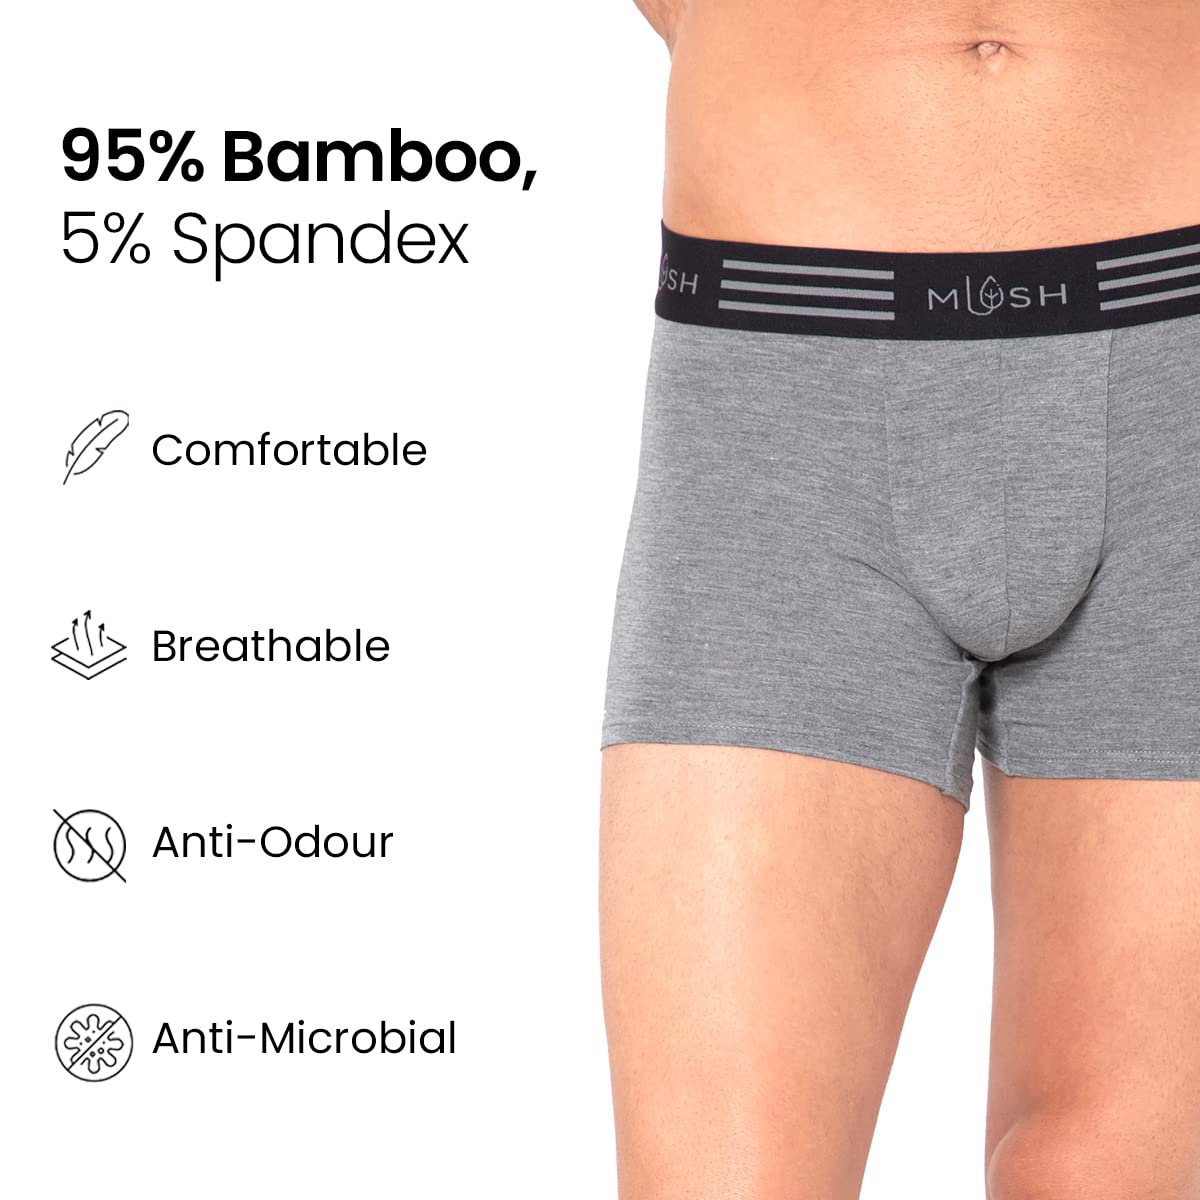 Mush Ultra Soft, Breathable, Feather Light Men's Bamboo Trunk || Naturally Anti-Odor and Anti-Microbial Bamboo Innerwear Pack of 3 (XL, Grey)